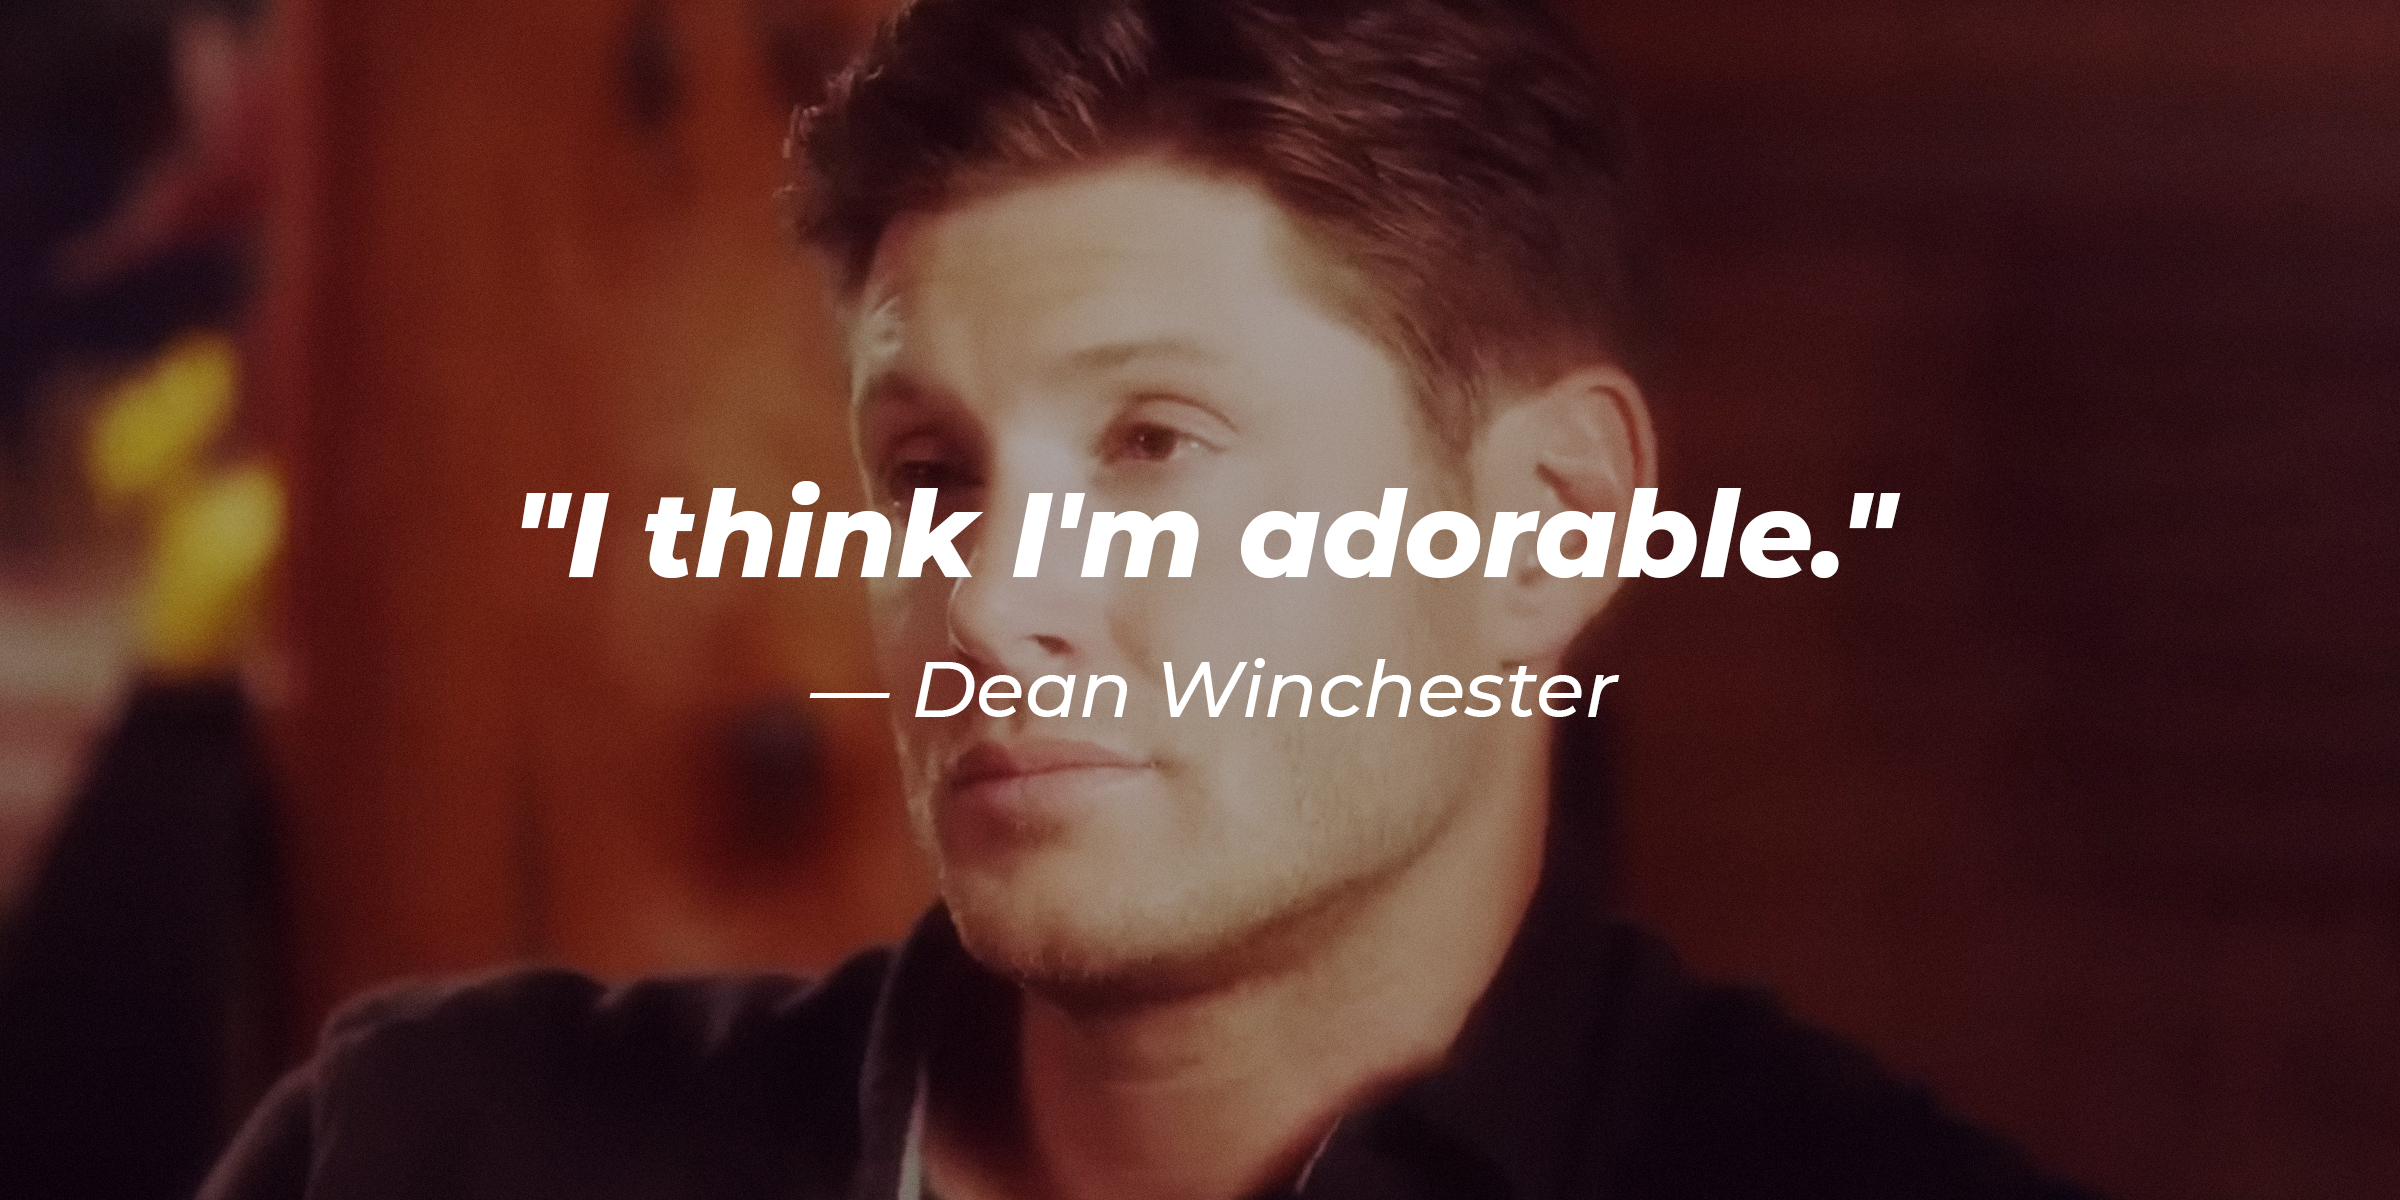 Dean Winchester with his quote, "I think I'm adorable." | Source: The CW Television Network